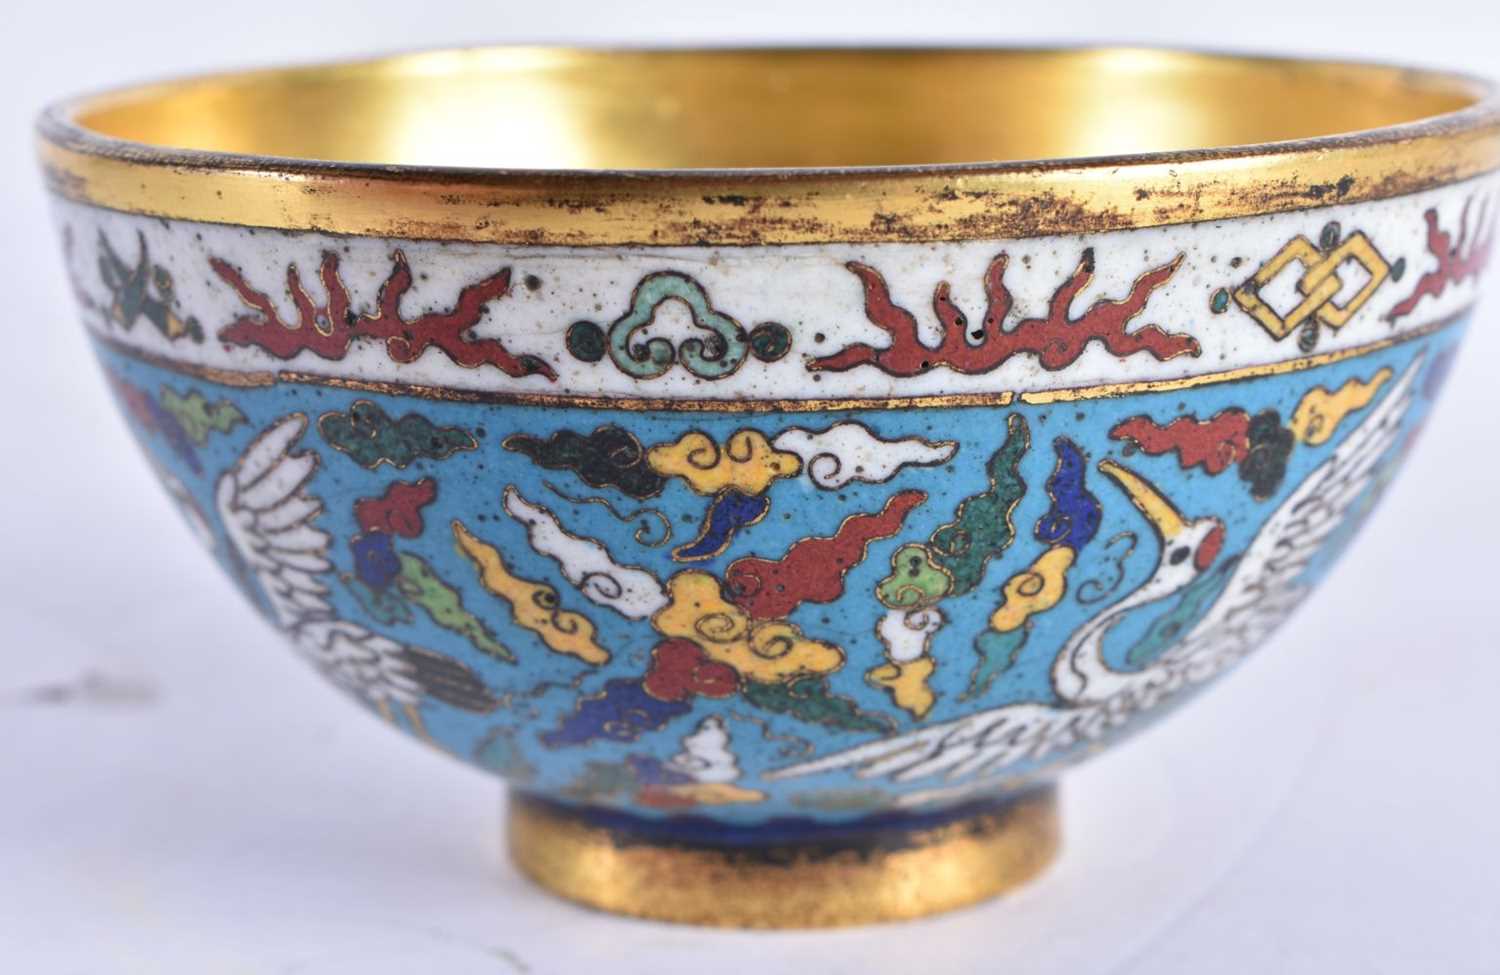 A FINE PAIR OF CLOISONNE ENAMEL BRONZE BOWLS Jiajing mark and probably of the period, decorated on a - Image 11 of 16